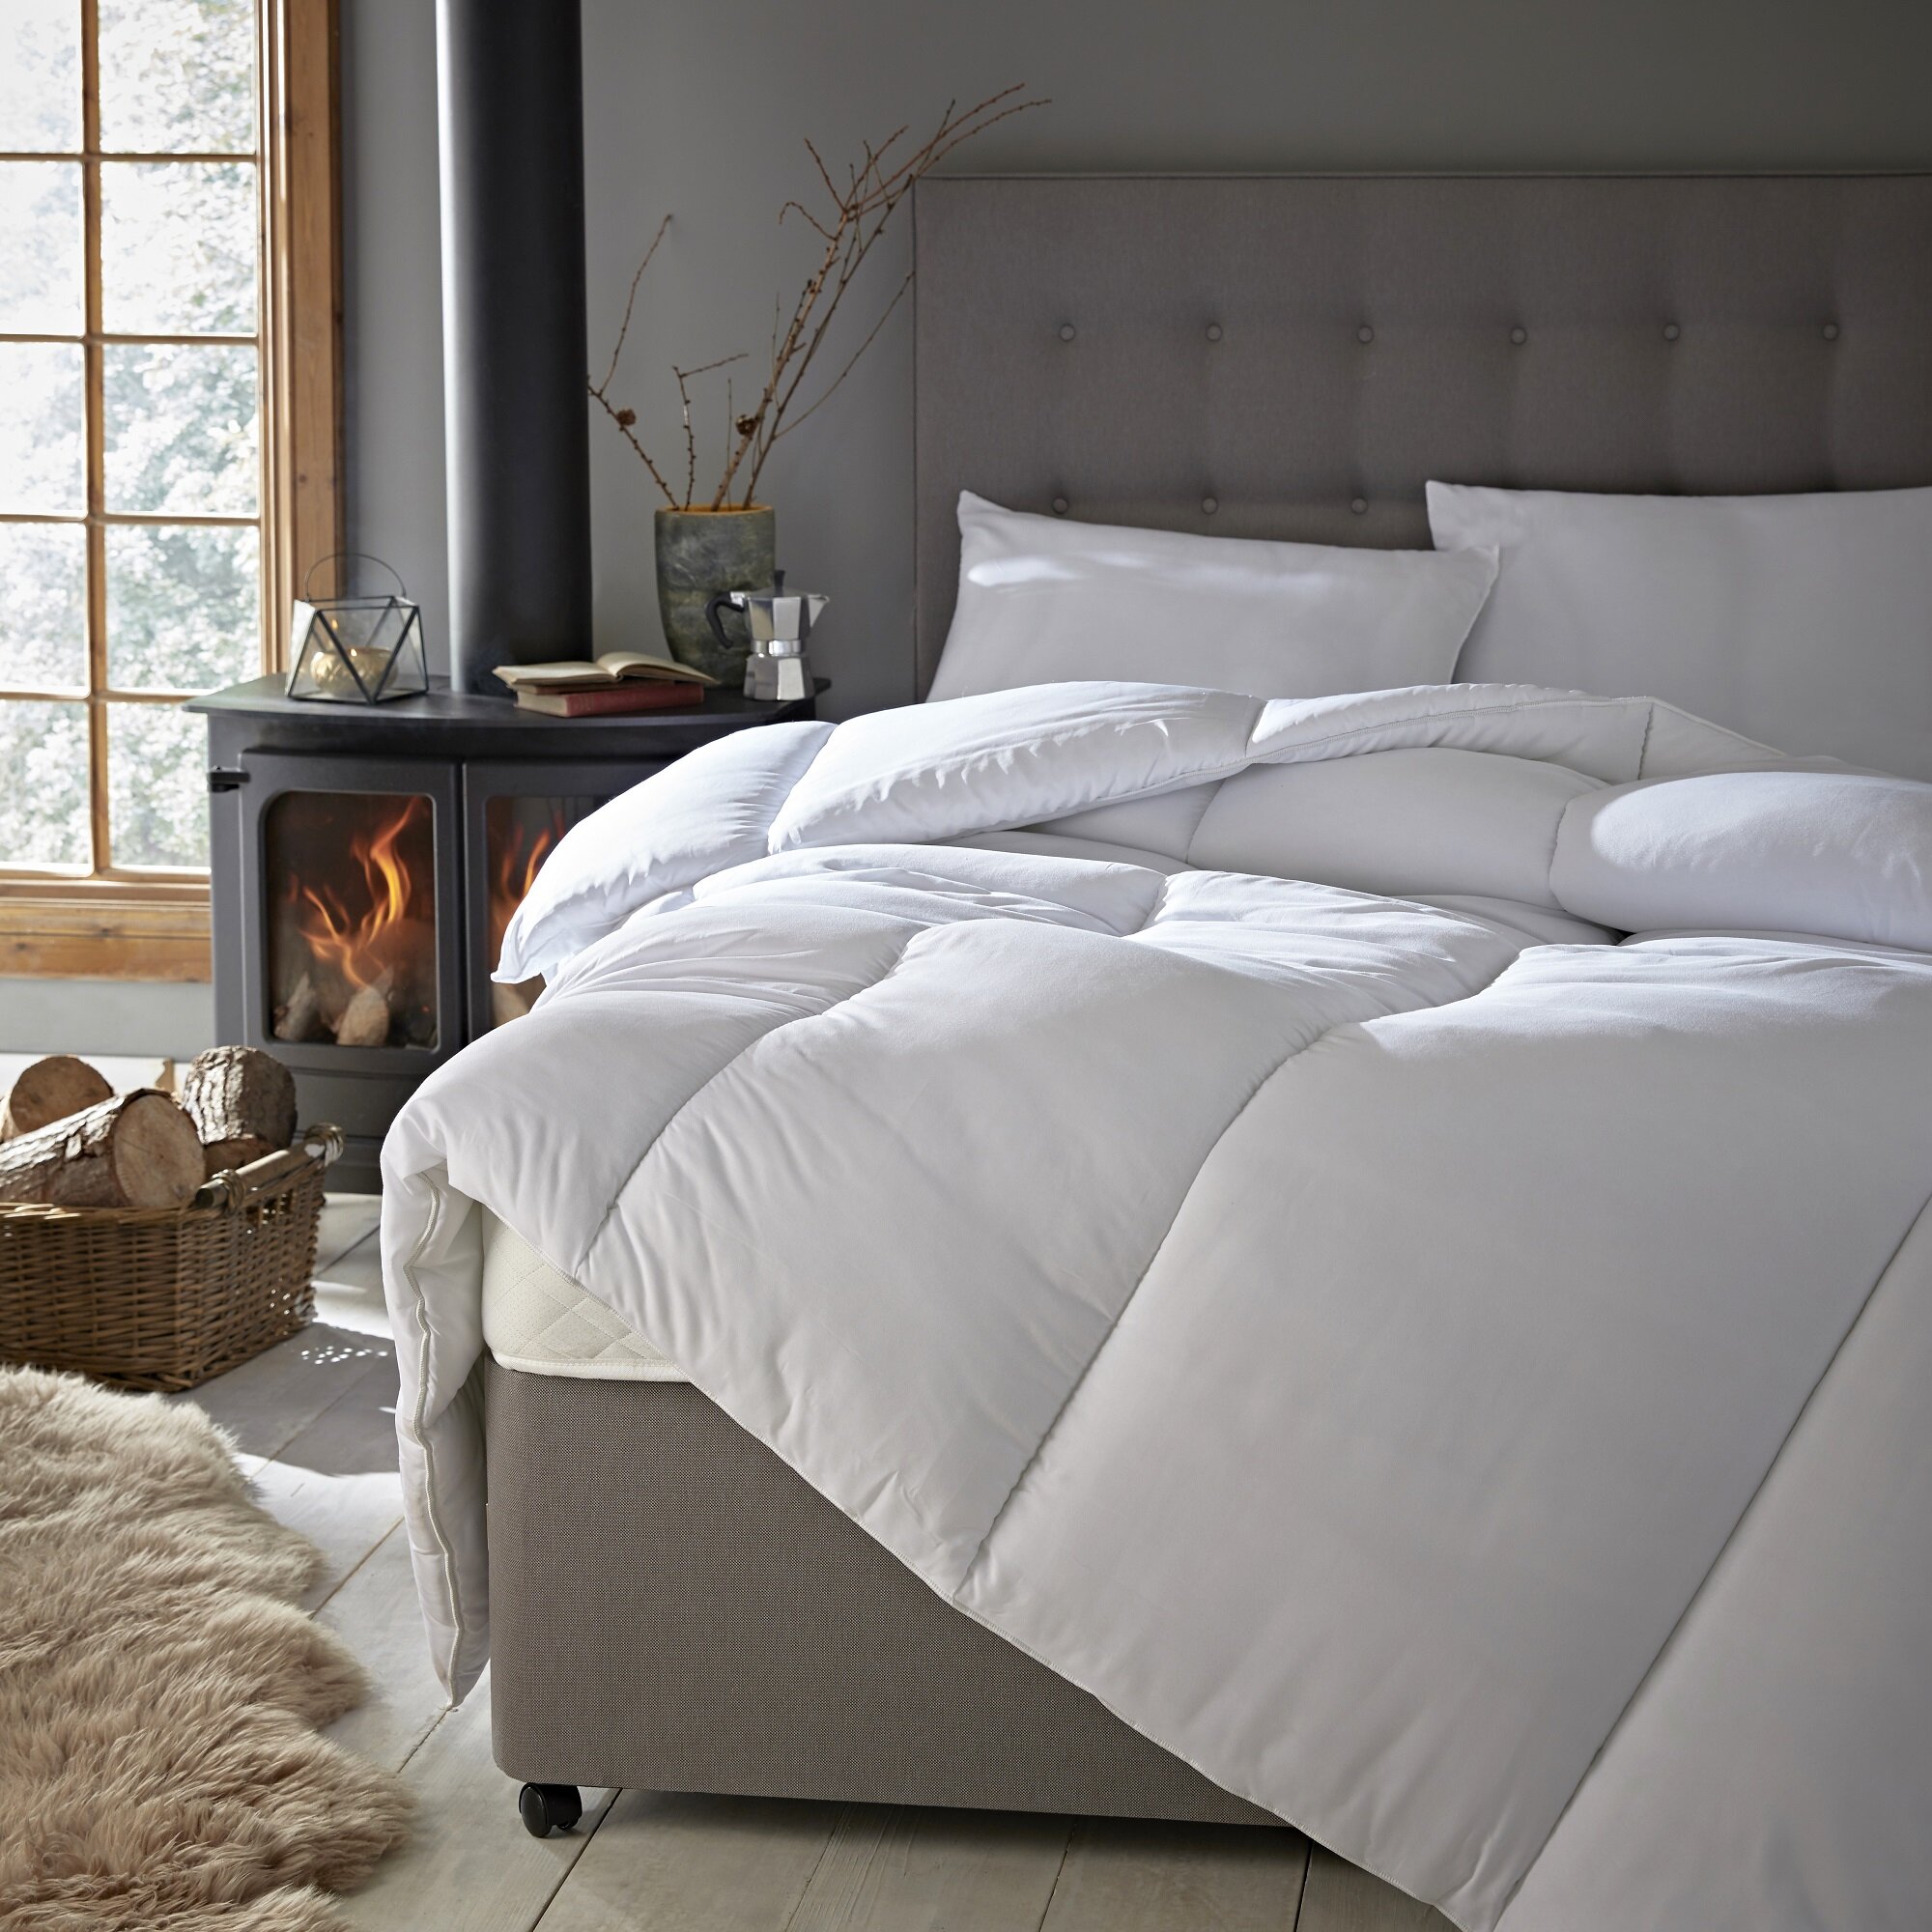 Anti Allergy 15.0 Tog Duvet Quilt Hollowfibre Filled Corovin Thick Warm & Cosy UK Made Double